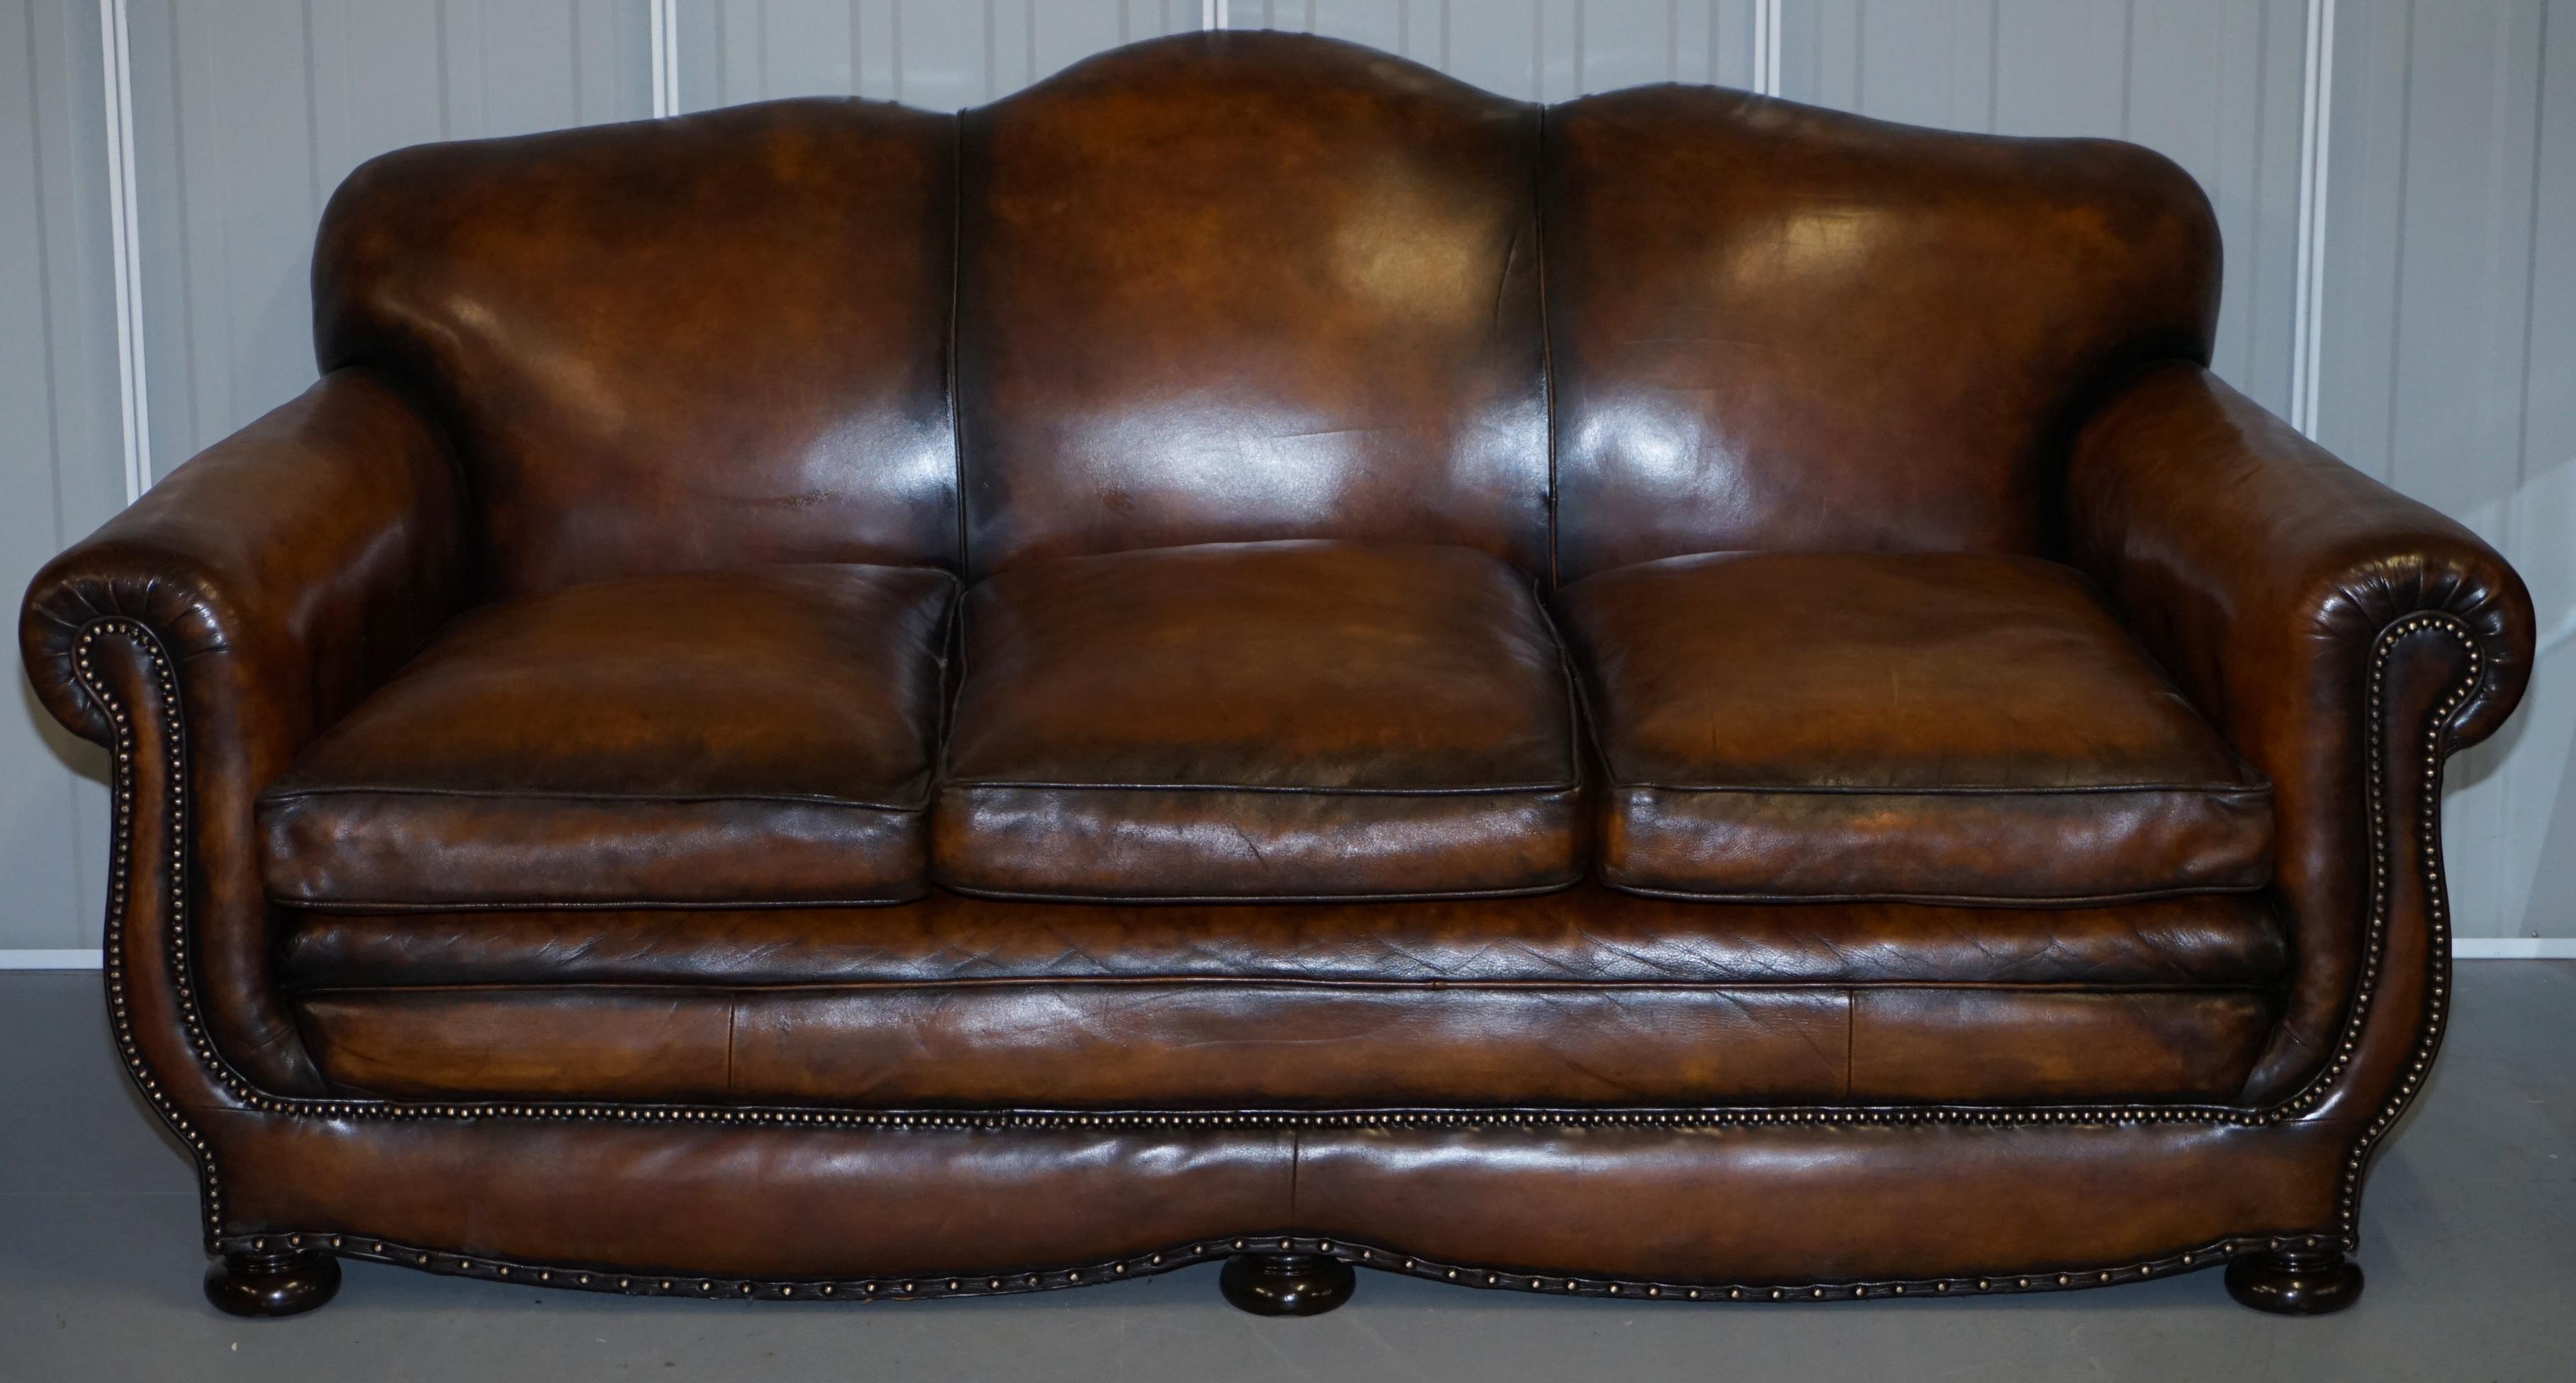 We are delighted to offer for sale this absolutely exceptional, fully restored, very rare original Victorian gentleman’s club sofa with coil sprung base and rare Moustache back

This is one of the best looking sofas around, it has the original